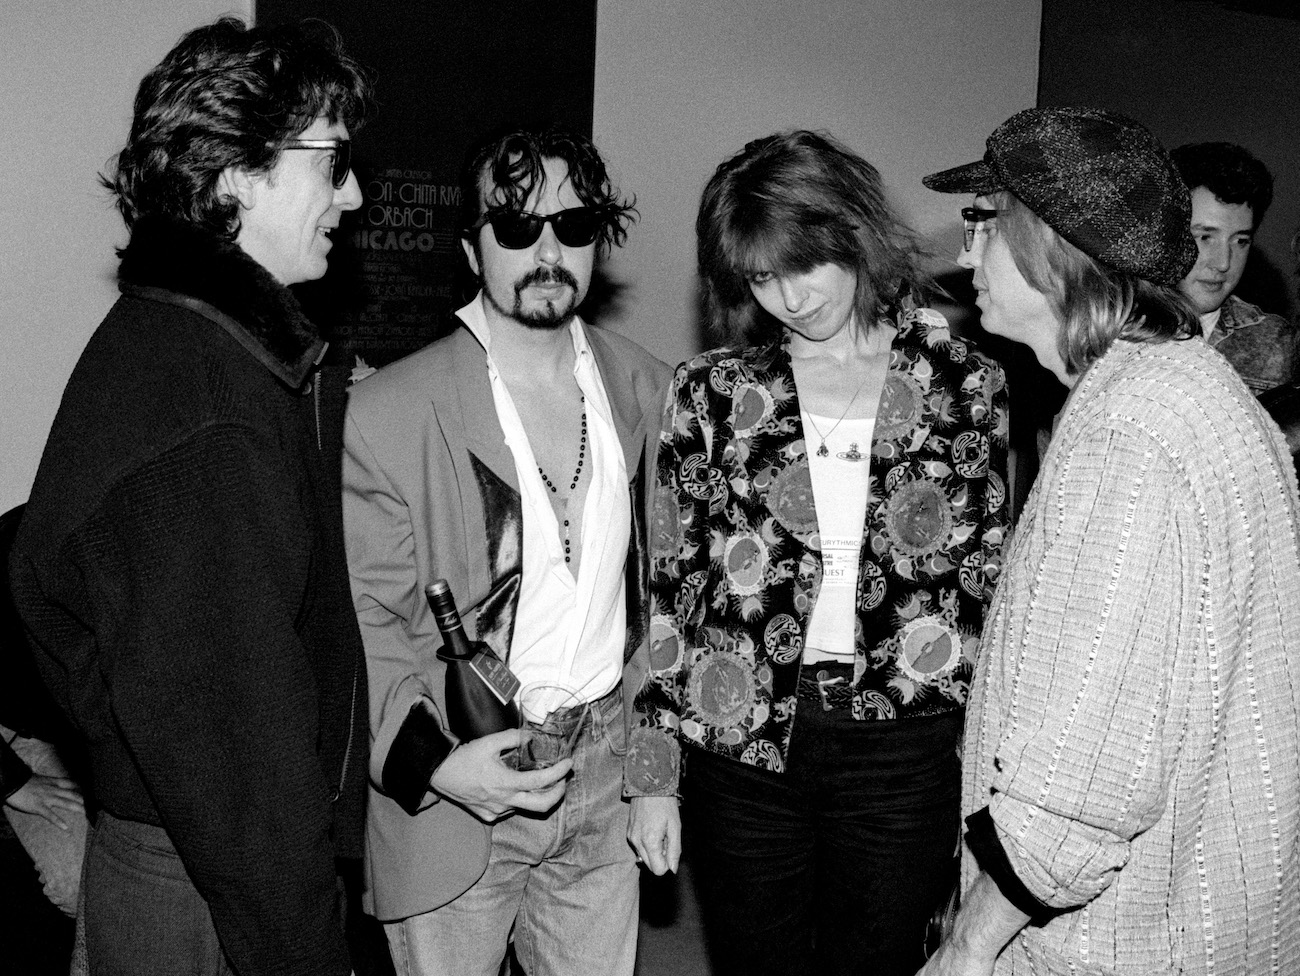 George Harrison, Dave Stewart, Chrissie Hynde, and Tom Petty at an event in 1990.